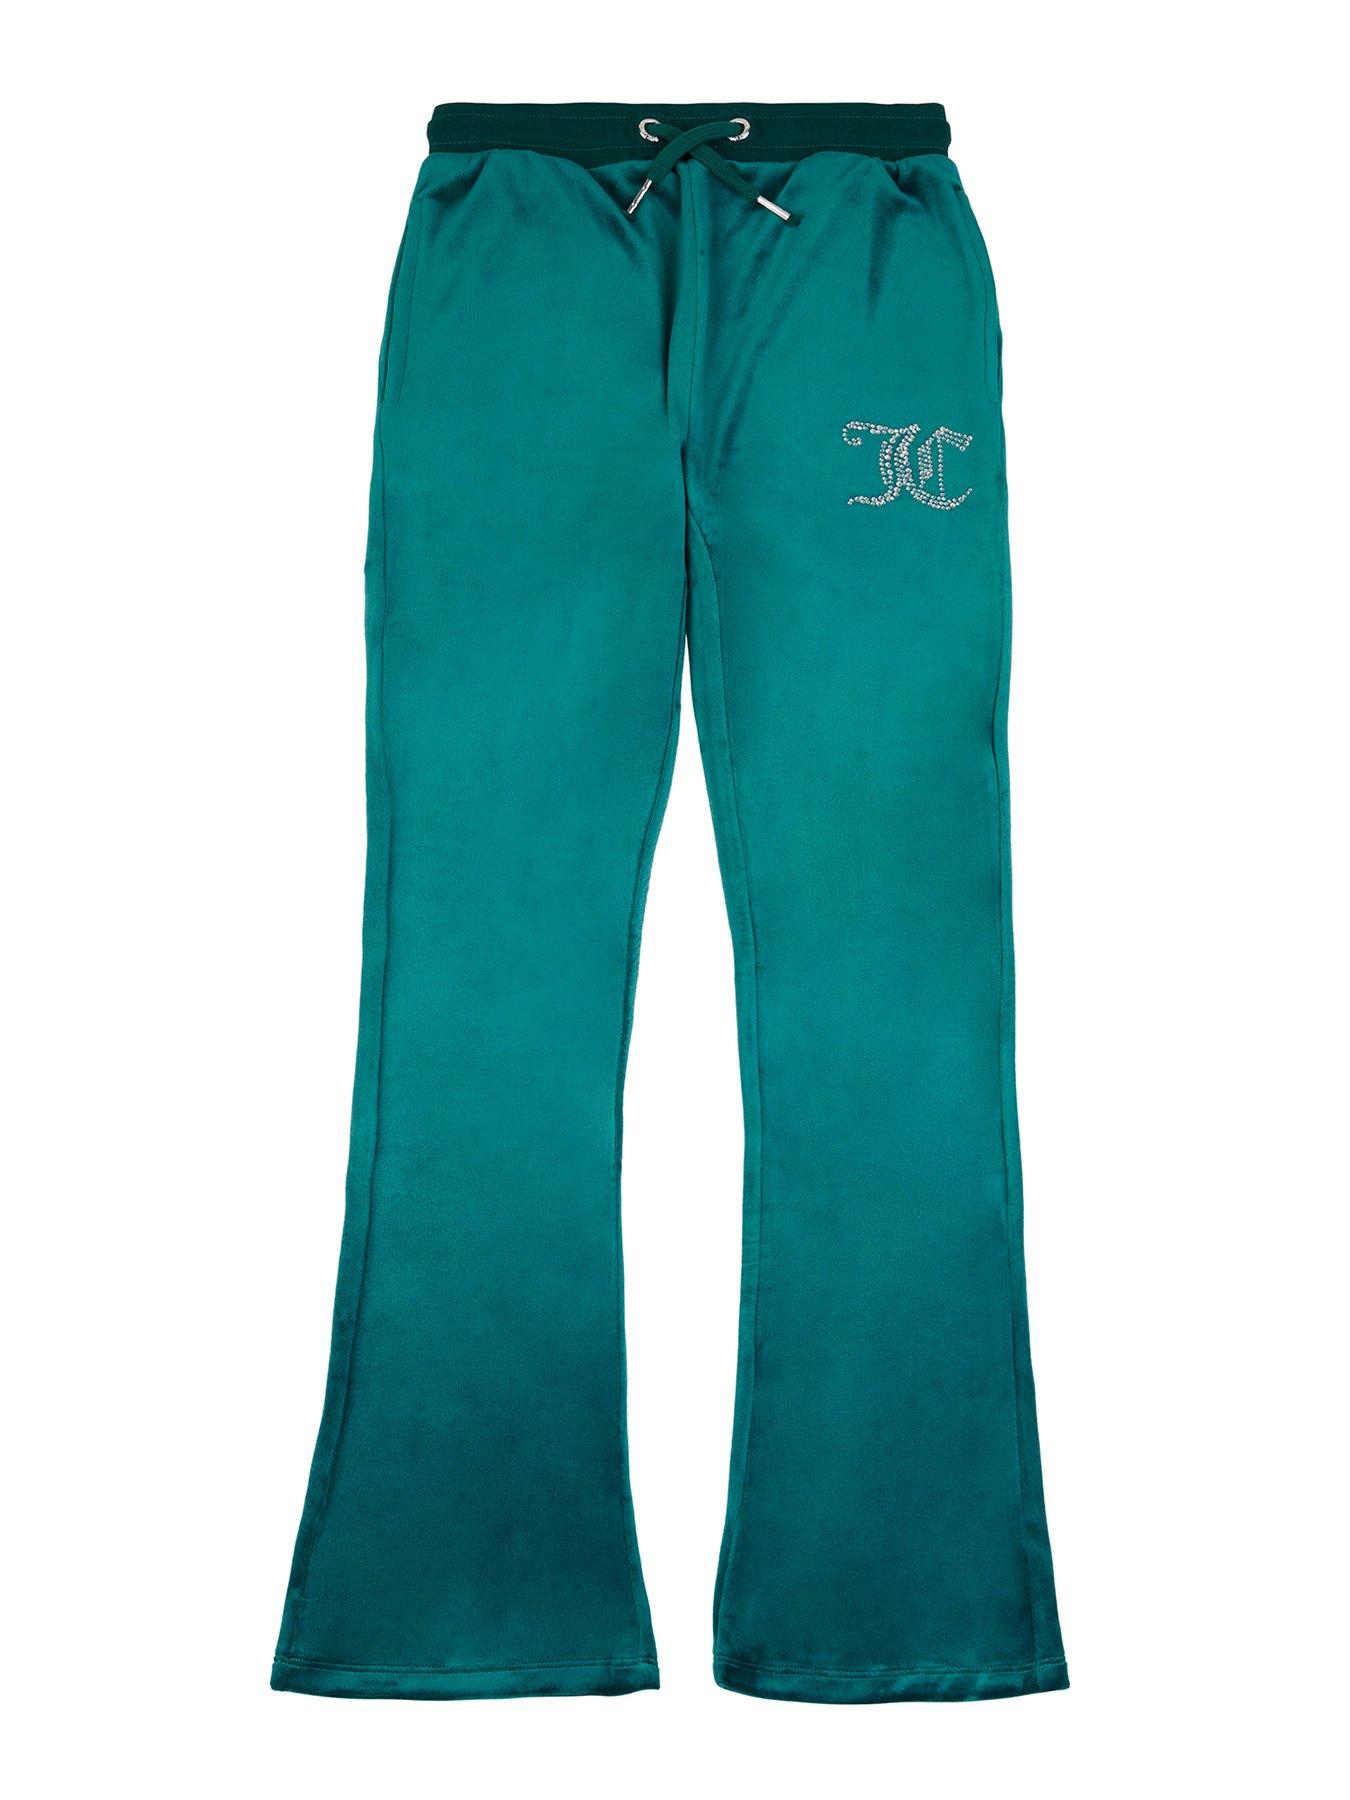 Juicy Couture Girls Diamante Velour Bootcut Joggers - Night Sky